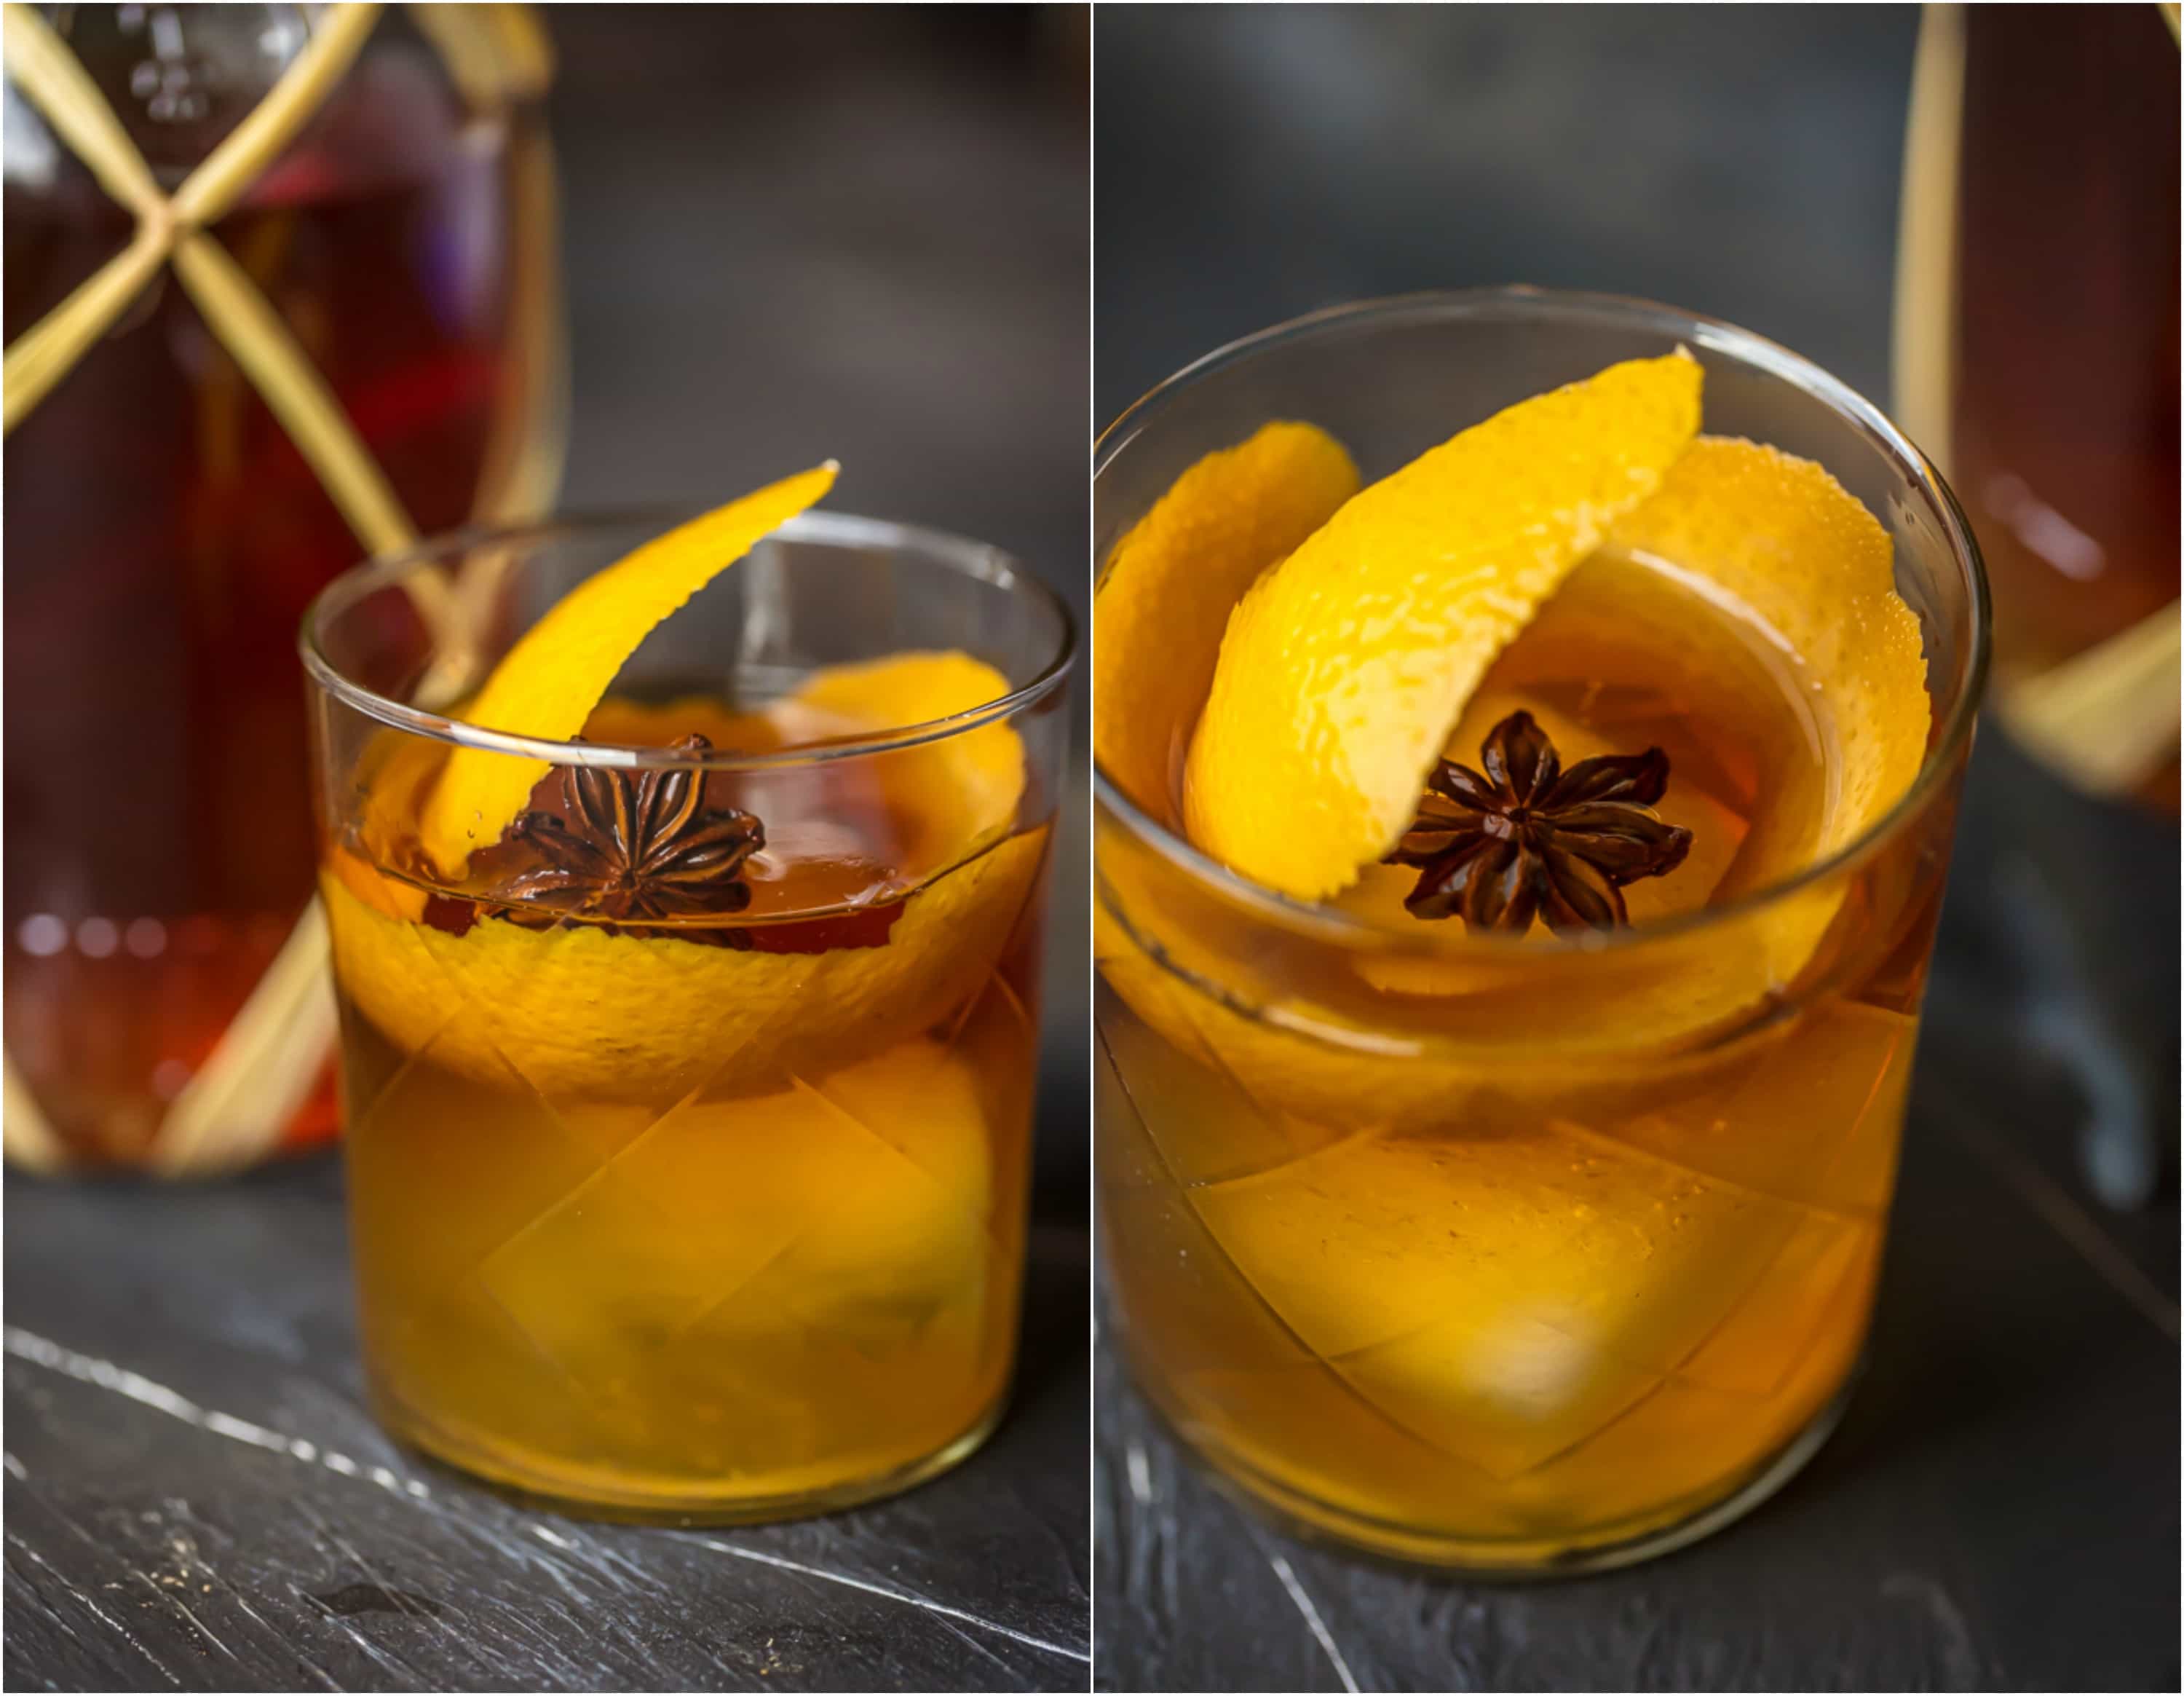 Best Spiced Rum Recipes - Spiced Rum drink in a glass